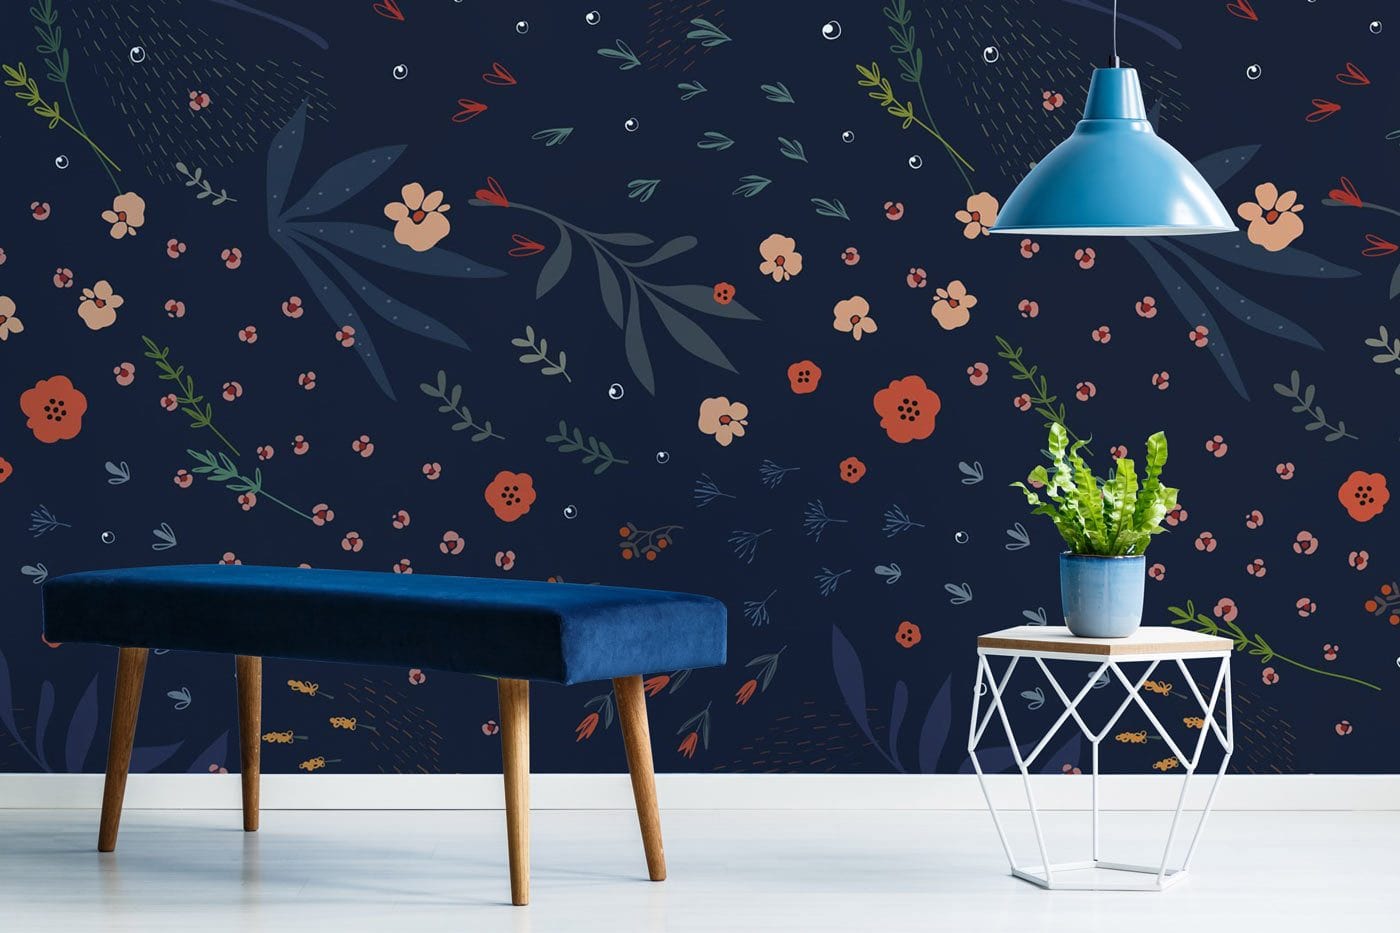 Wallpaper mural with dark blue leaves for the hallway's decor